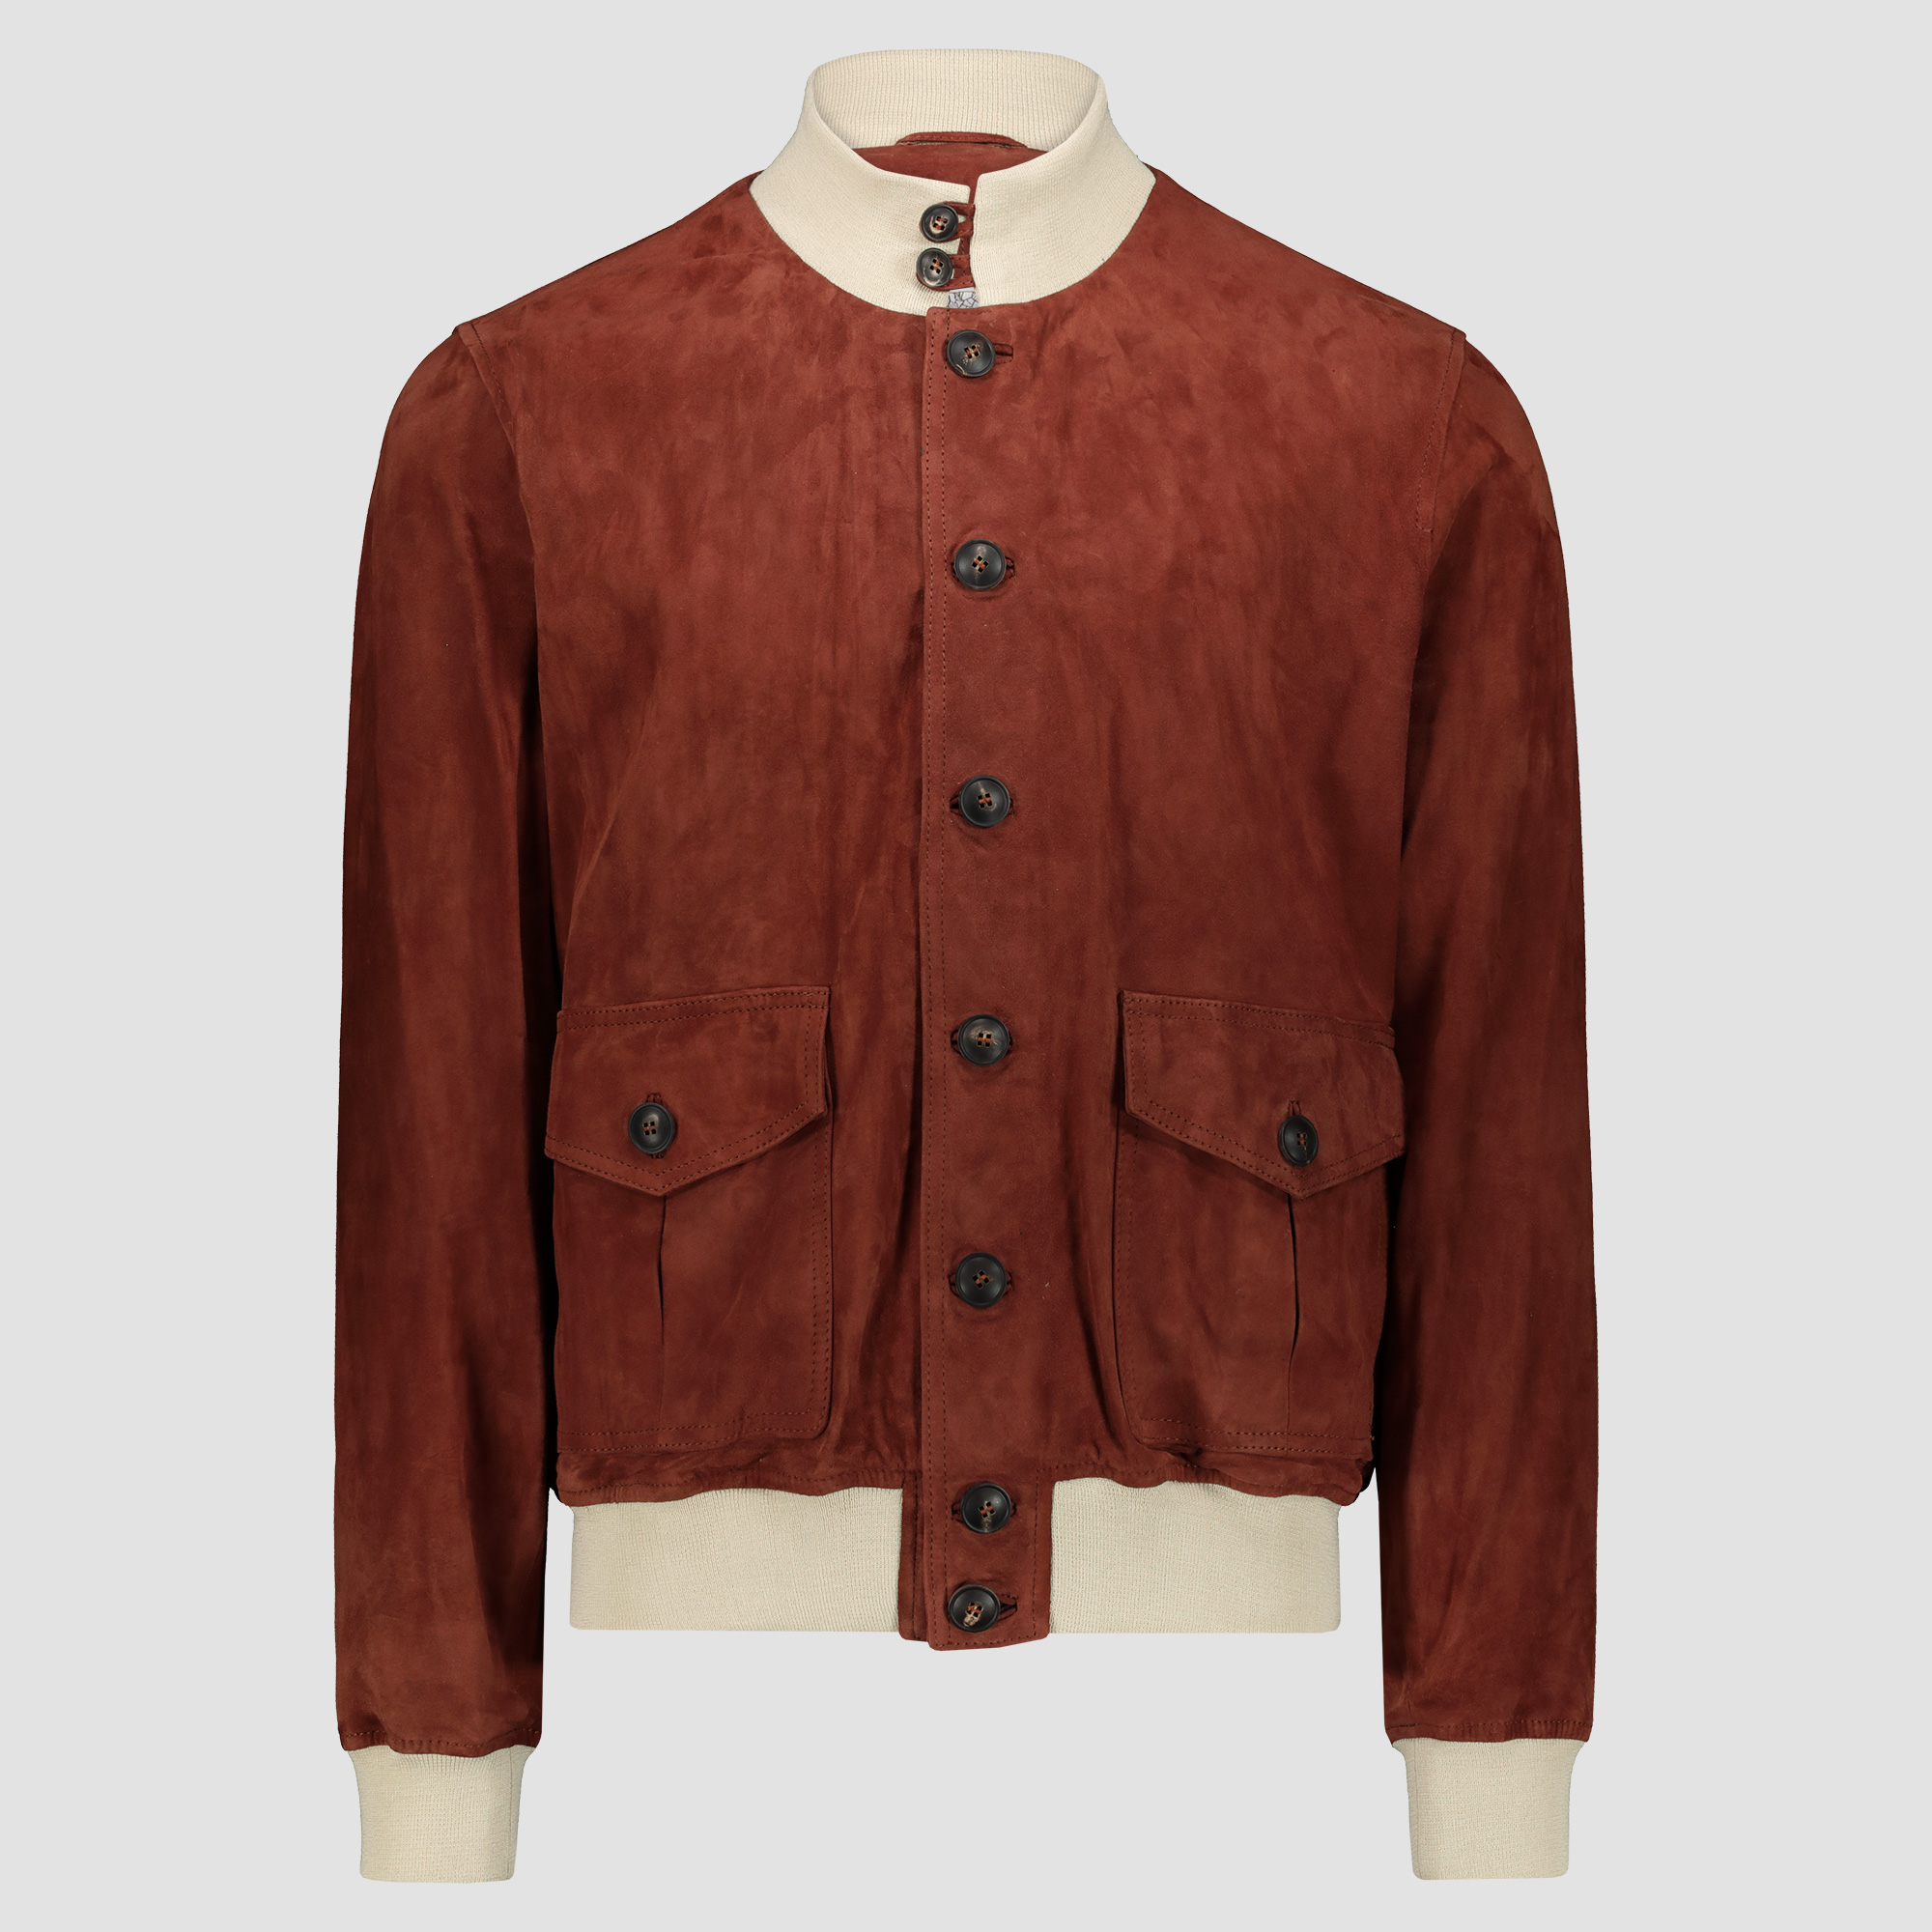 Brick suede & beige details Bomber Jacket A1 Cary –